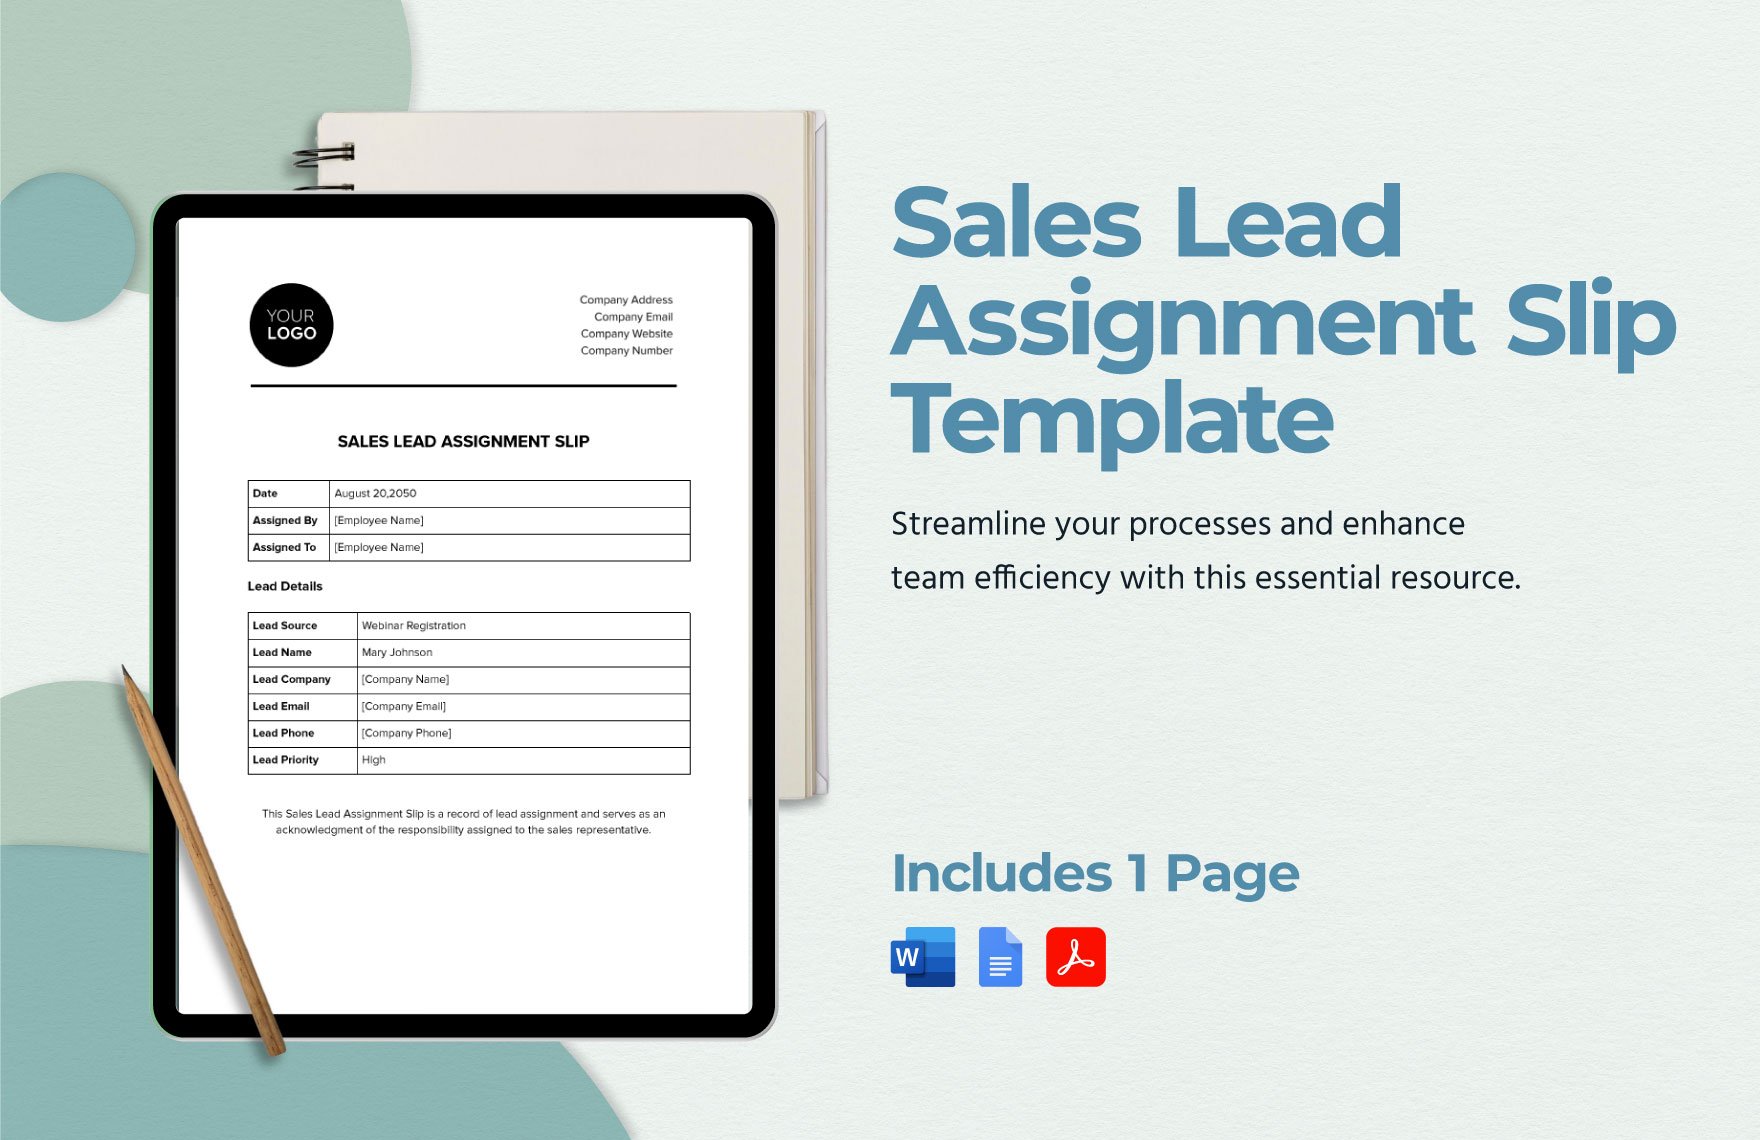 Sales Lead Assignment Slip Template